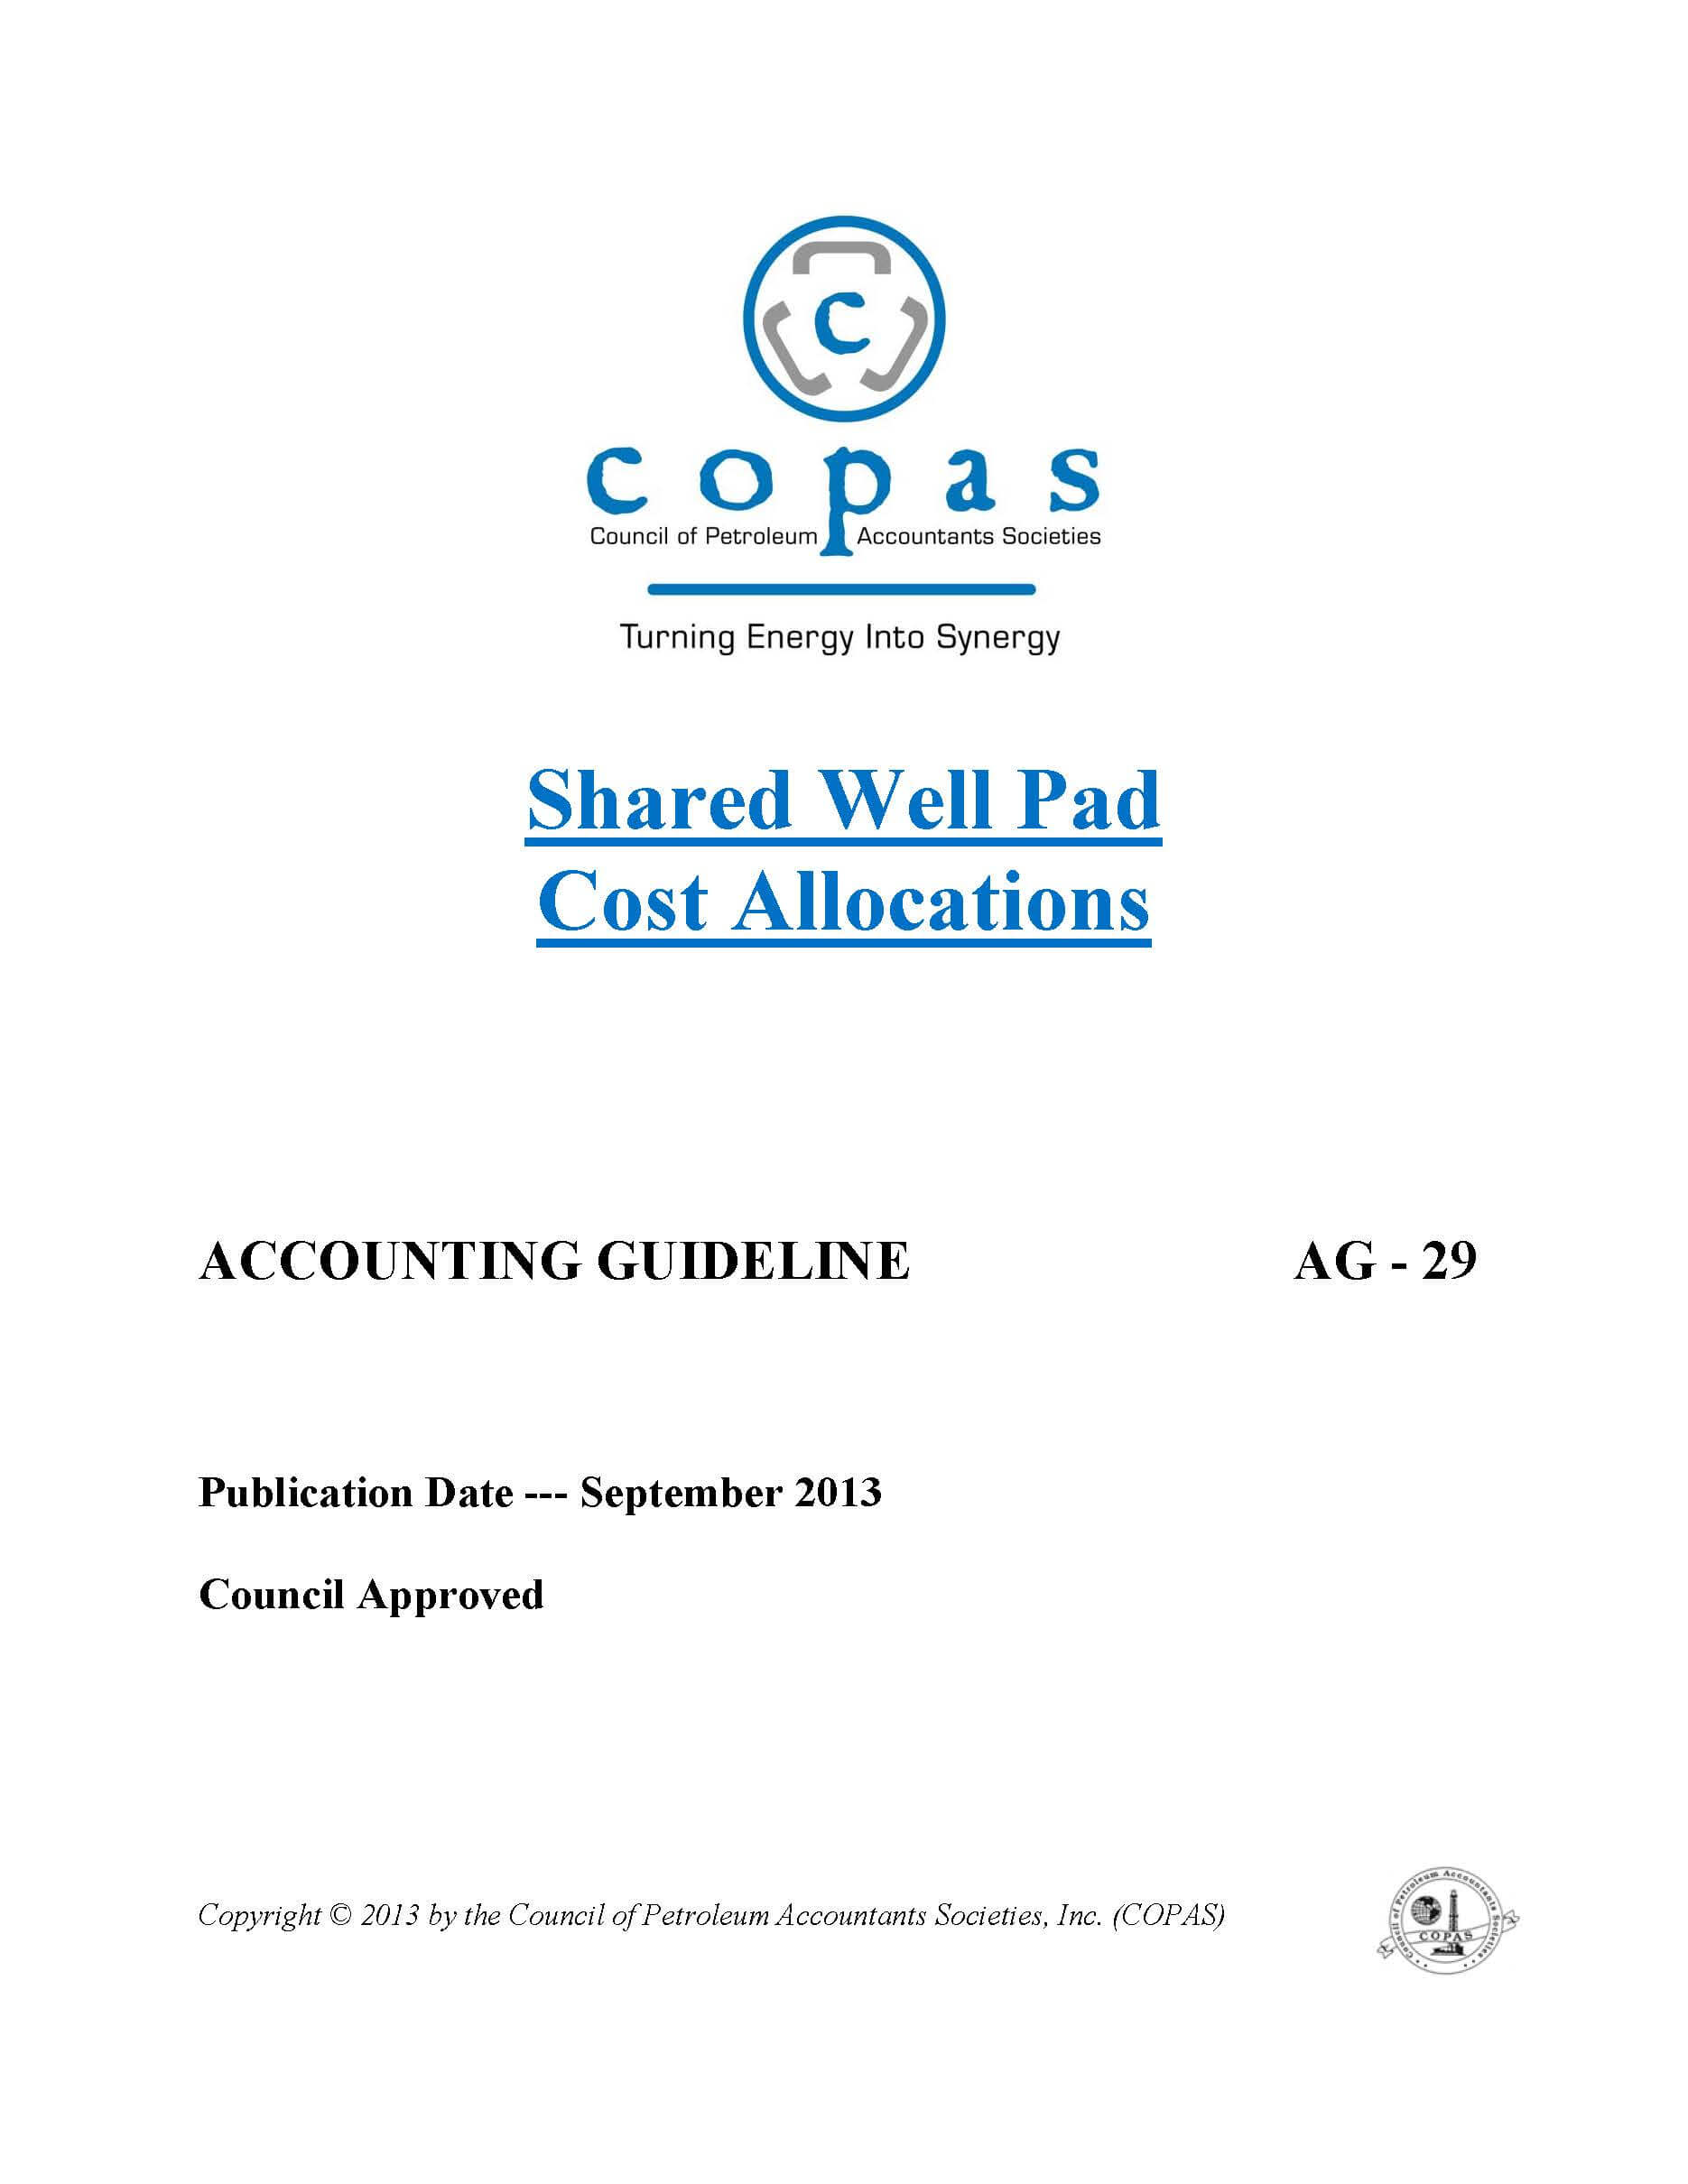 AG-29 Shared Well Pad Cost Allocations - products AG 29 Shared Well Pad Cost Allocations - Council of Petroleum Accountants Societies